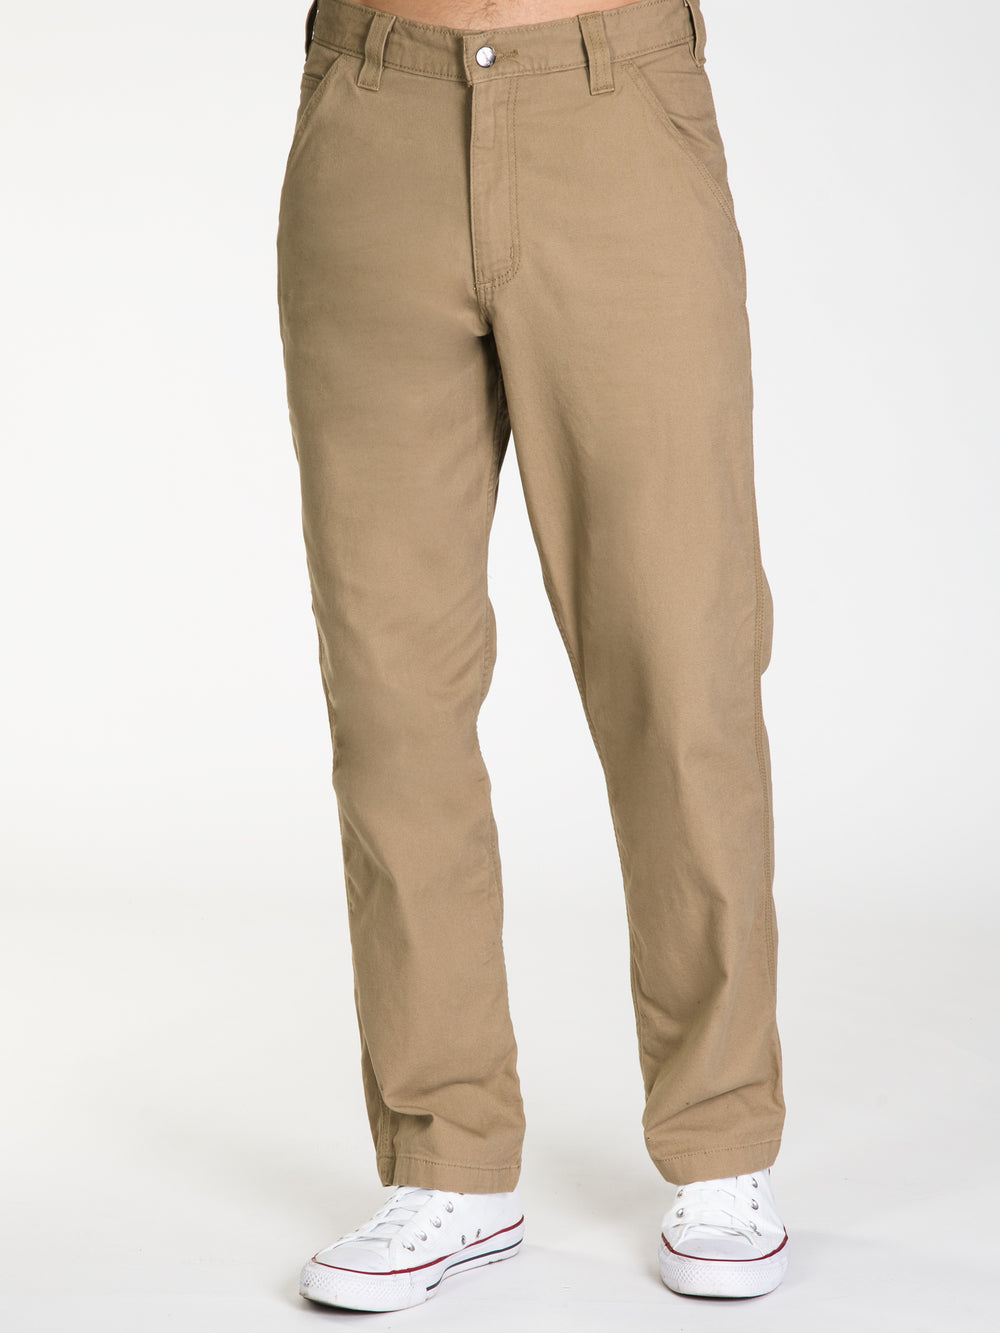 Carhartt Rugged Flex Relaxed Fit Canvas Cargo Work Pant